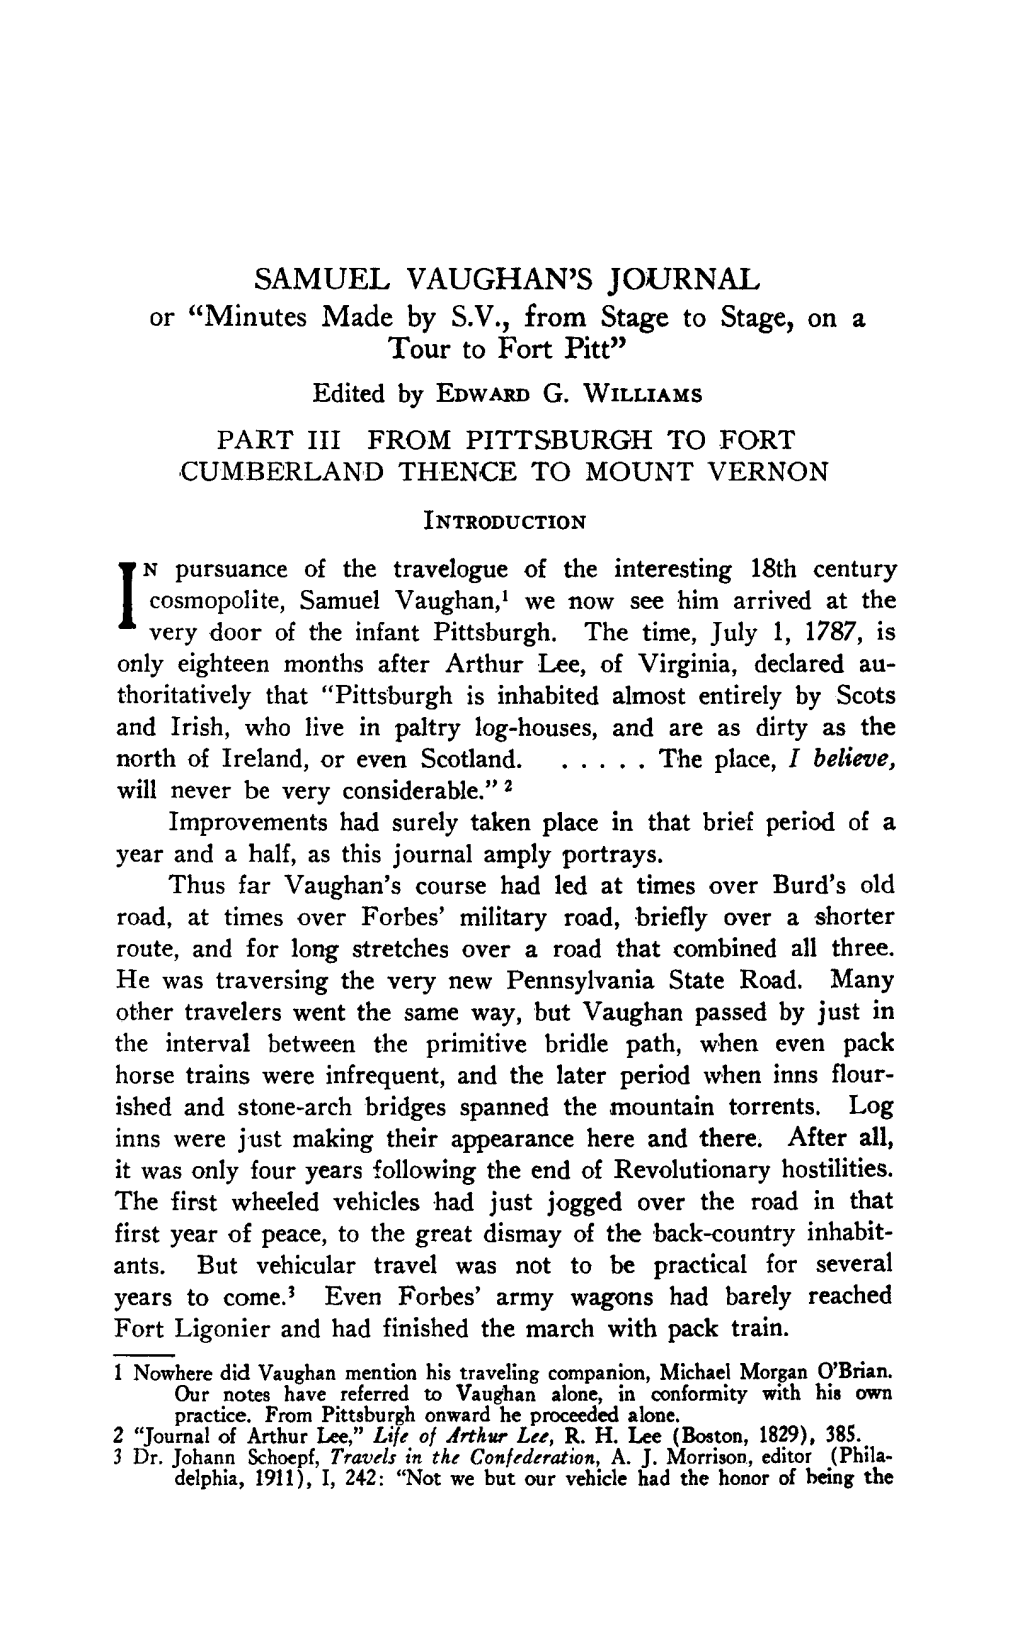 SAMUEL VAUGHAN's JOURNAL Or "Minutes Made by S.V., from Stage to Stage, on a Tour to Fort Pitt" Edited by Edwabd G